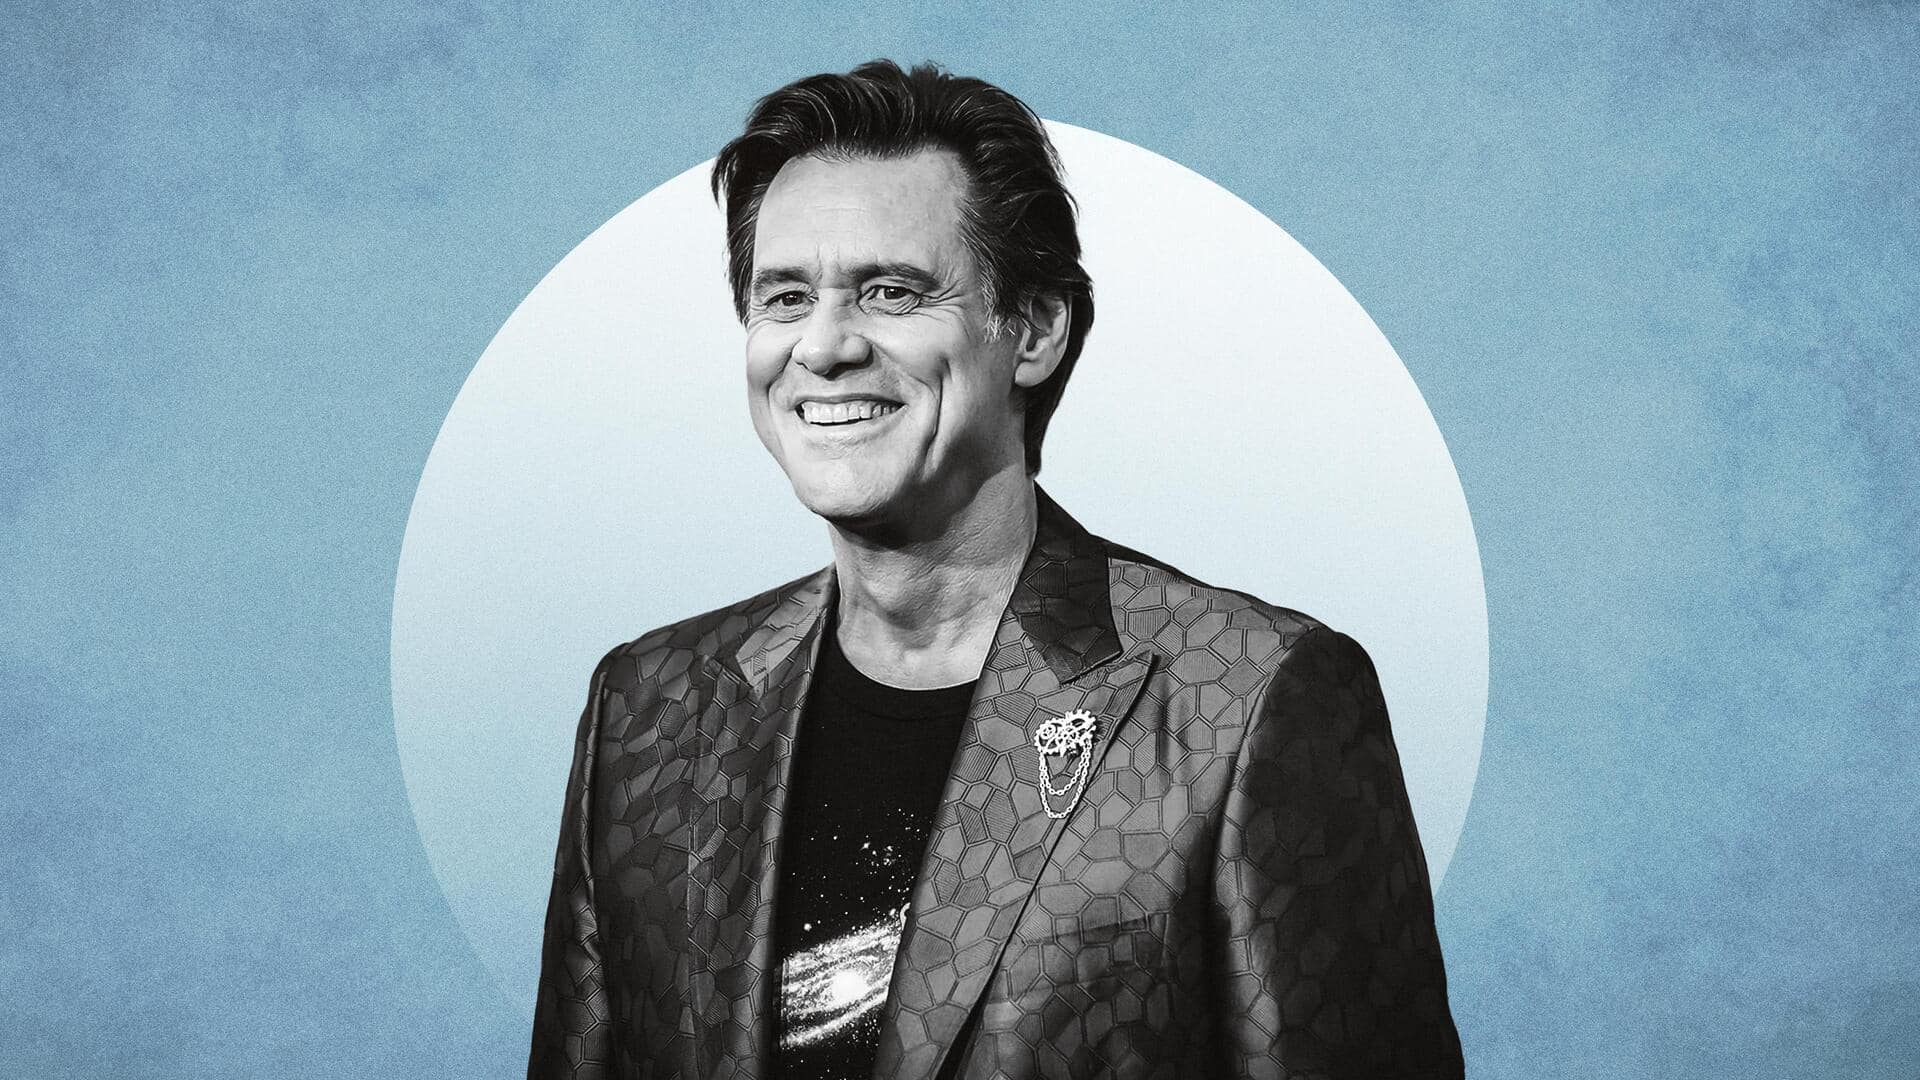 Jim Carrey's best films other than 'The Mask'